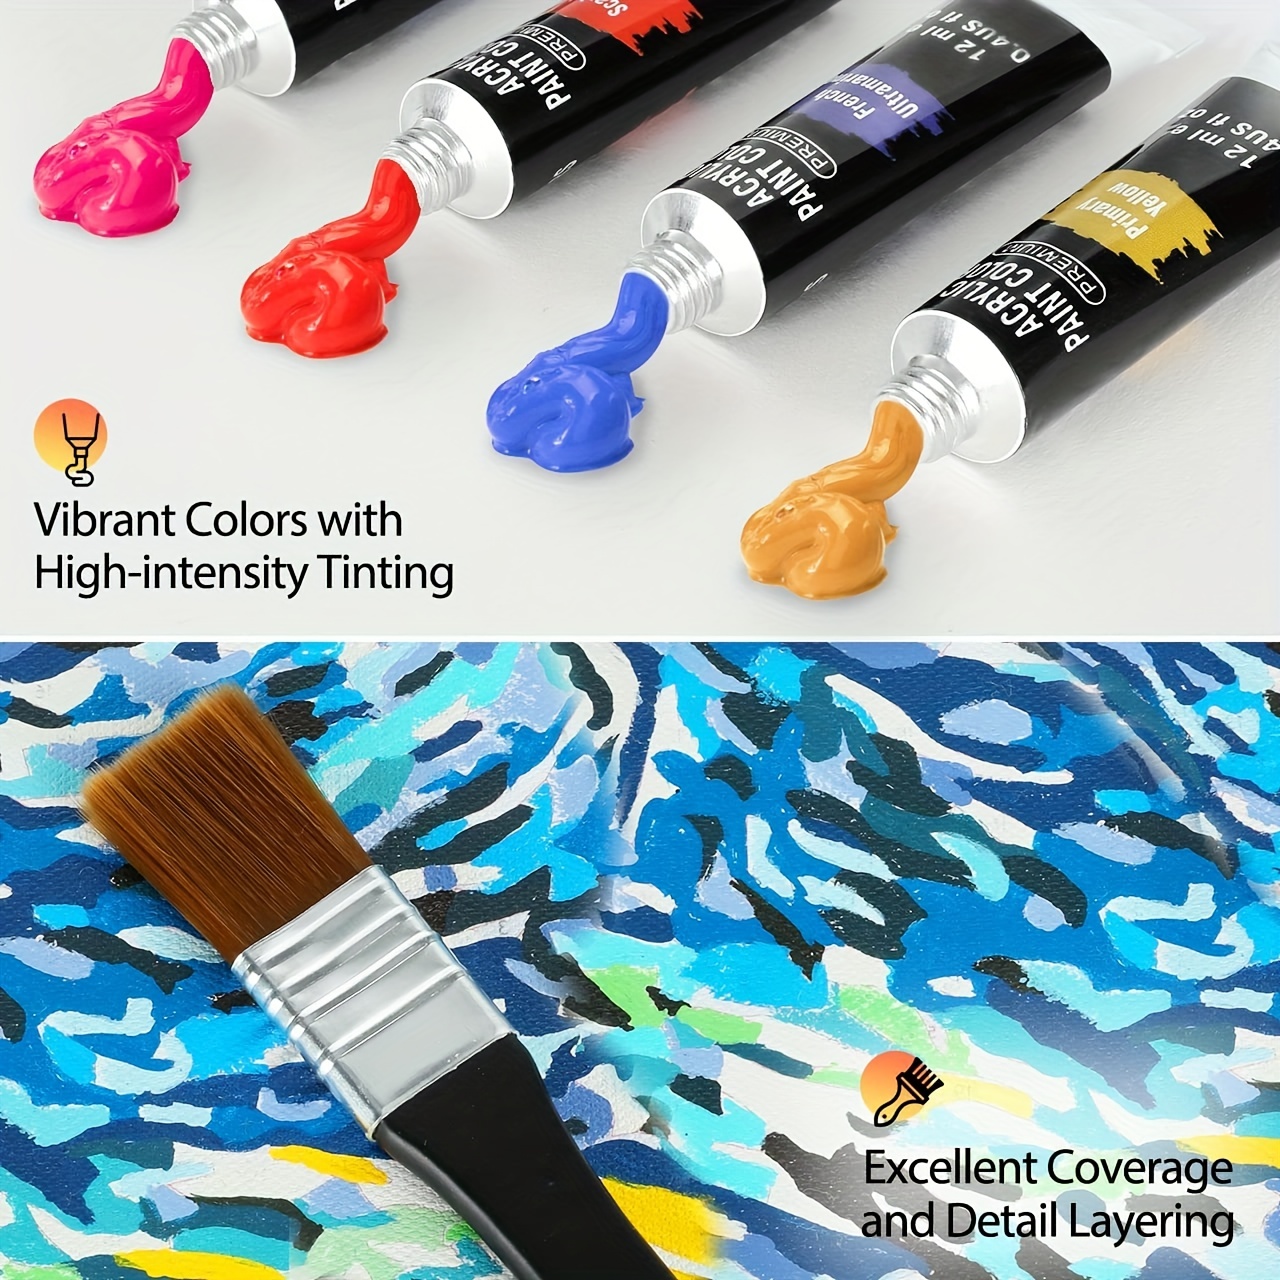 Top 11 Essential Acrylic Painting Supplies